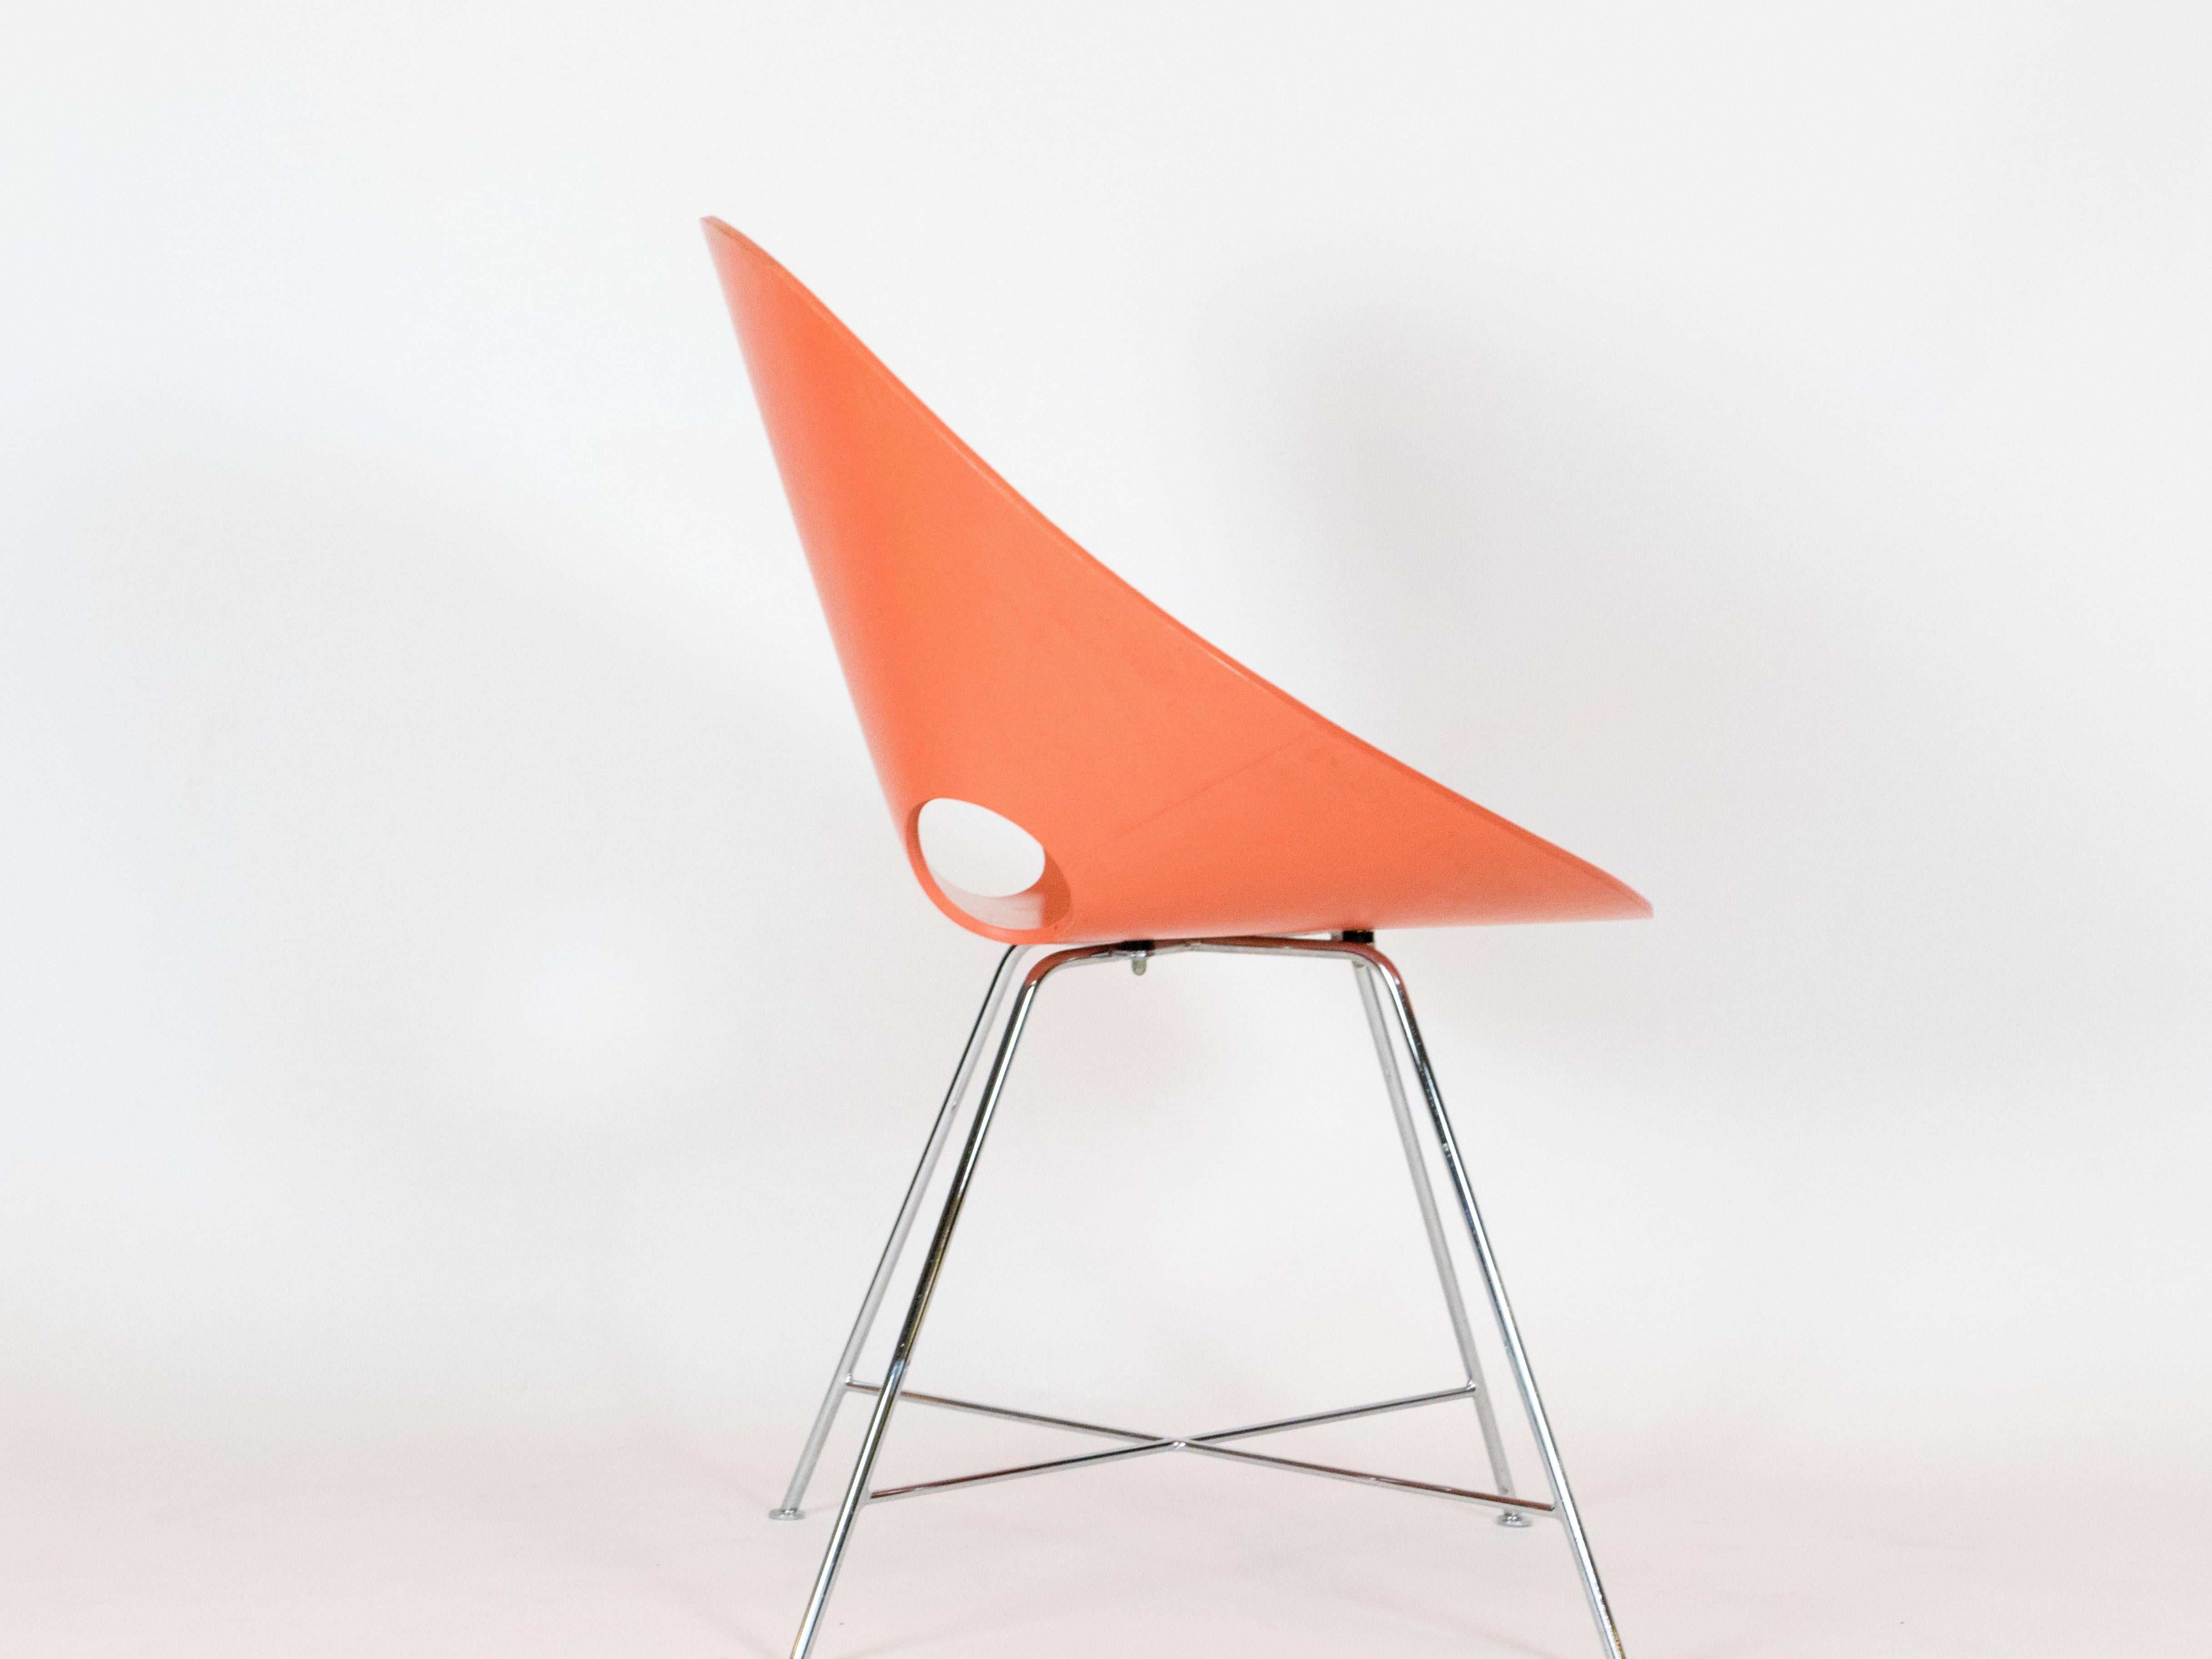 The ST 664 chair designed by Eddie Harlis in 1954. Thonet manufactured the chairs in Germany. These chairs are no longer produced. The two chairs, one in orange and other yellow are made from bent plywood (beech). The legs are chromed steel. In good